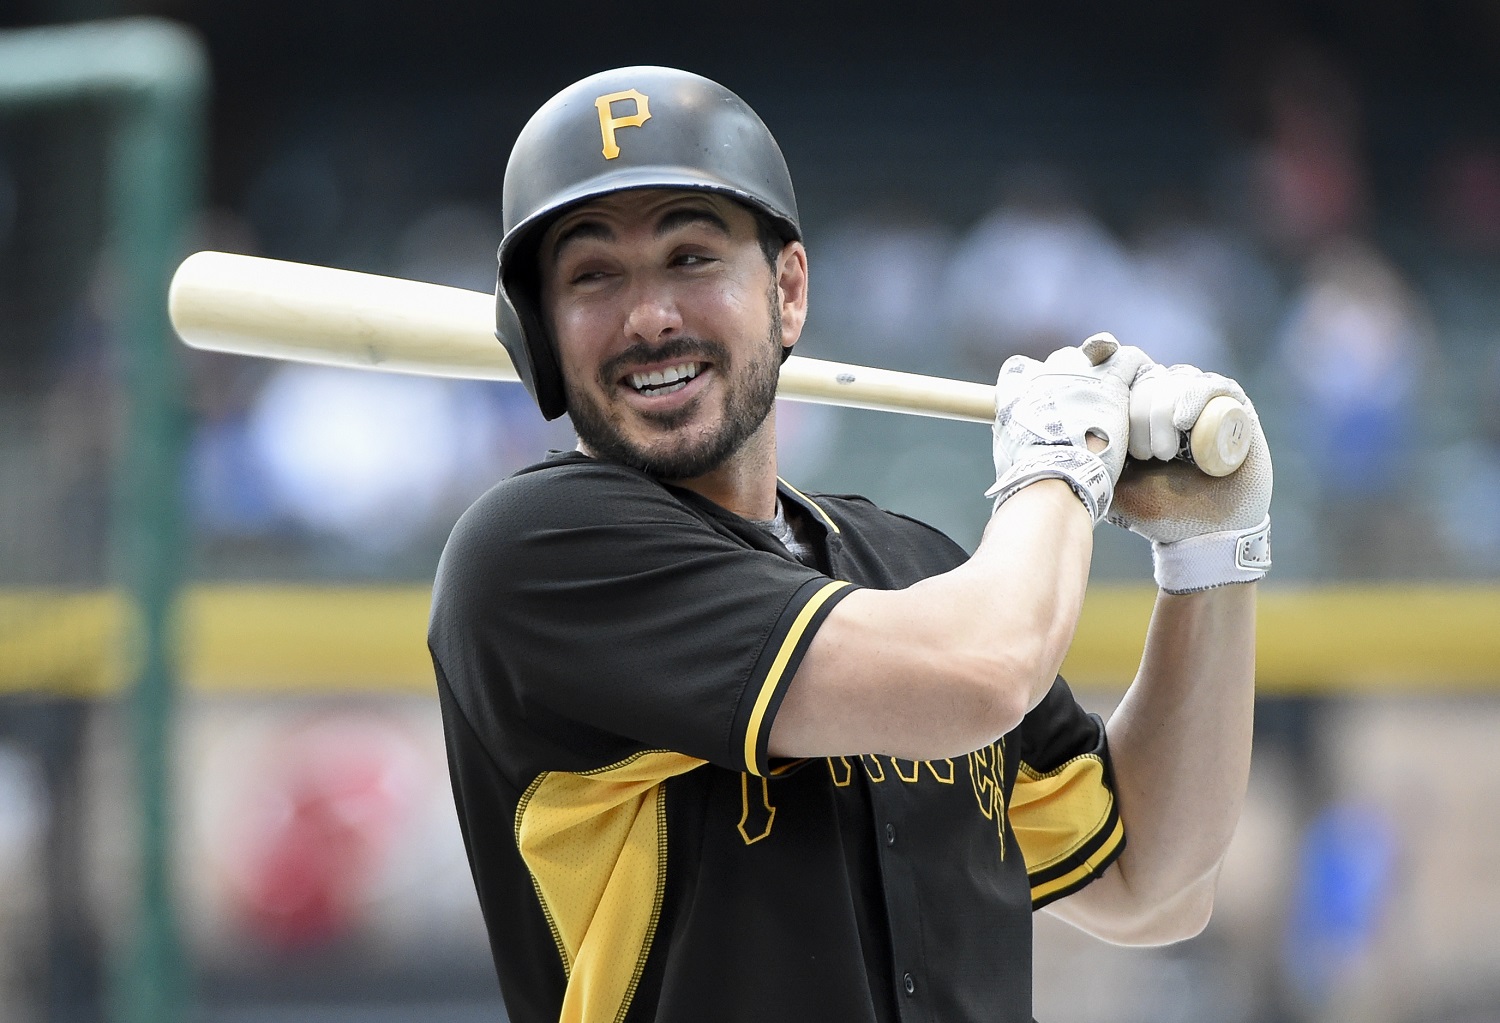 Pittsburgh Pirates' Matt Joyce takes batting practice before a baseball game against the Milwaukee Brewers Friday, July 29, 2016, in Milwaukee. (AP Photo/Benny Sieu)